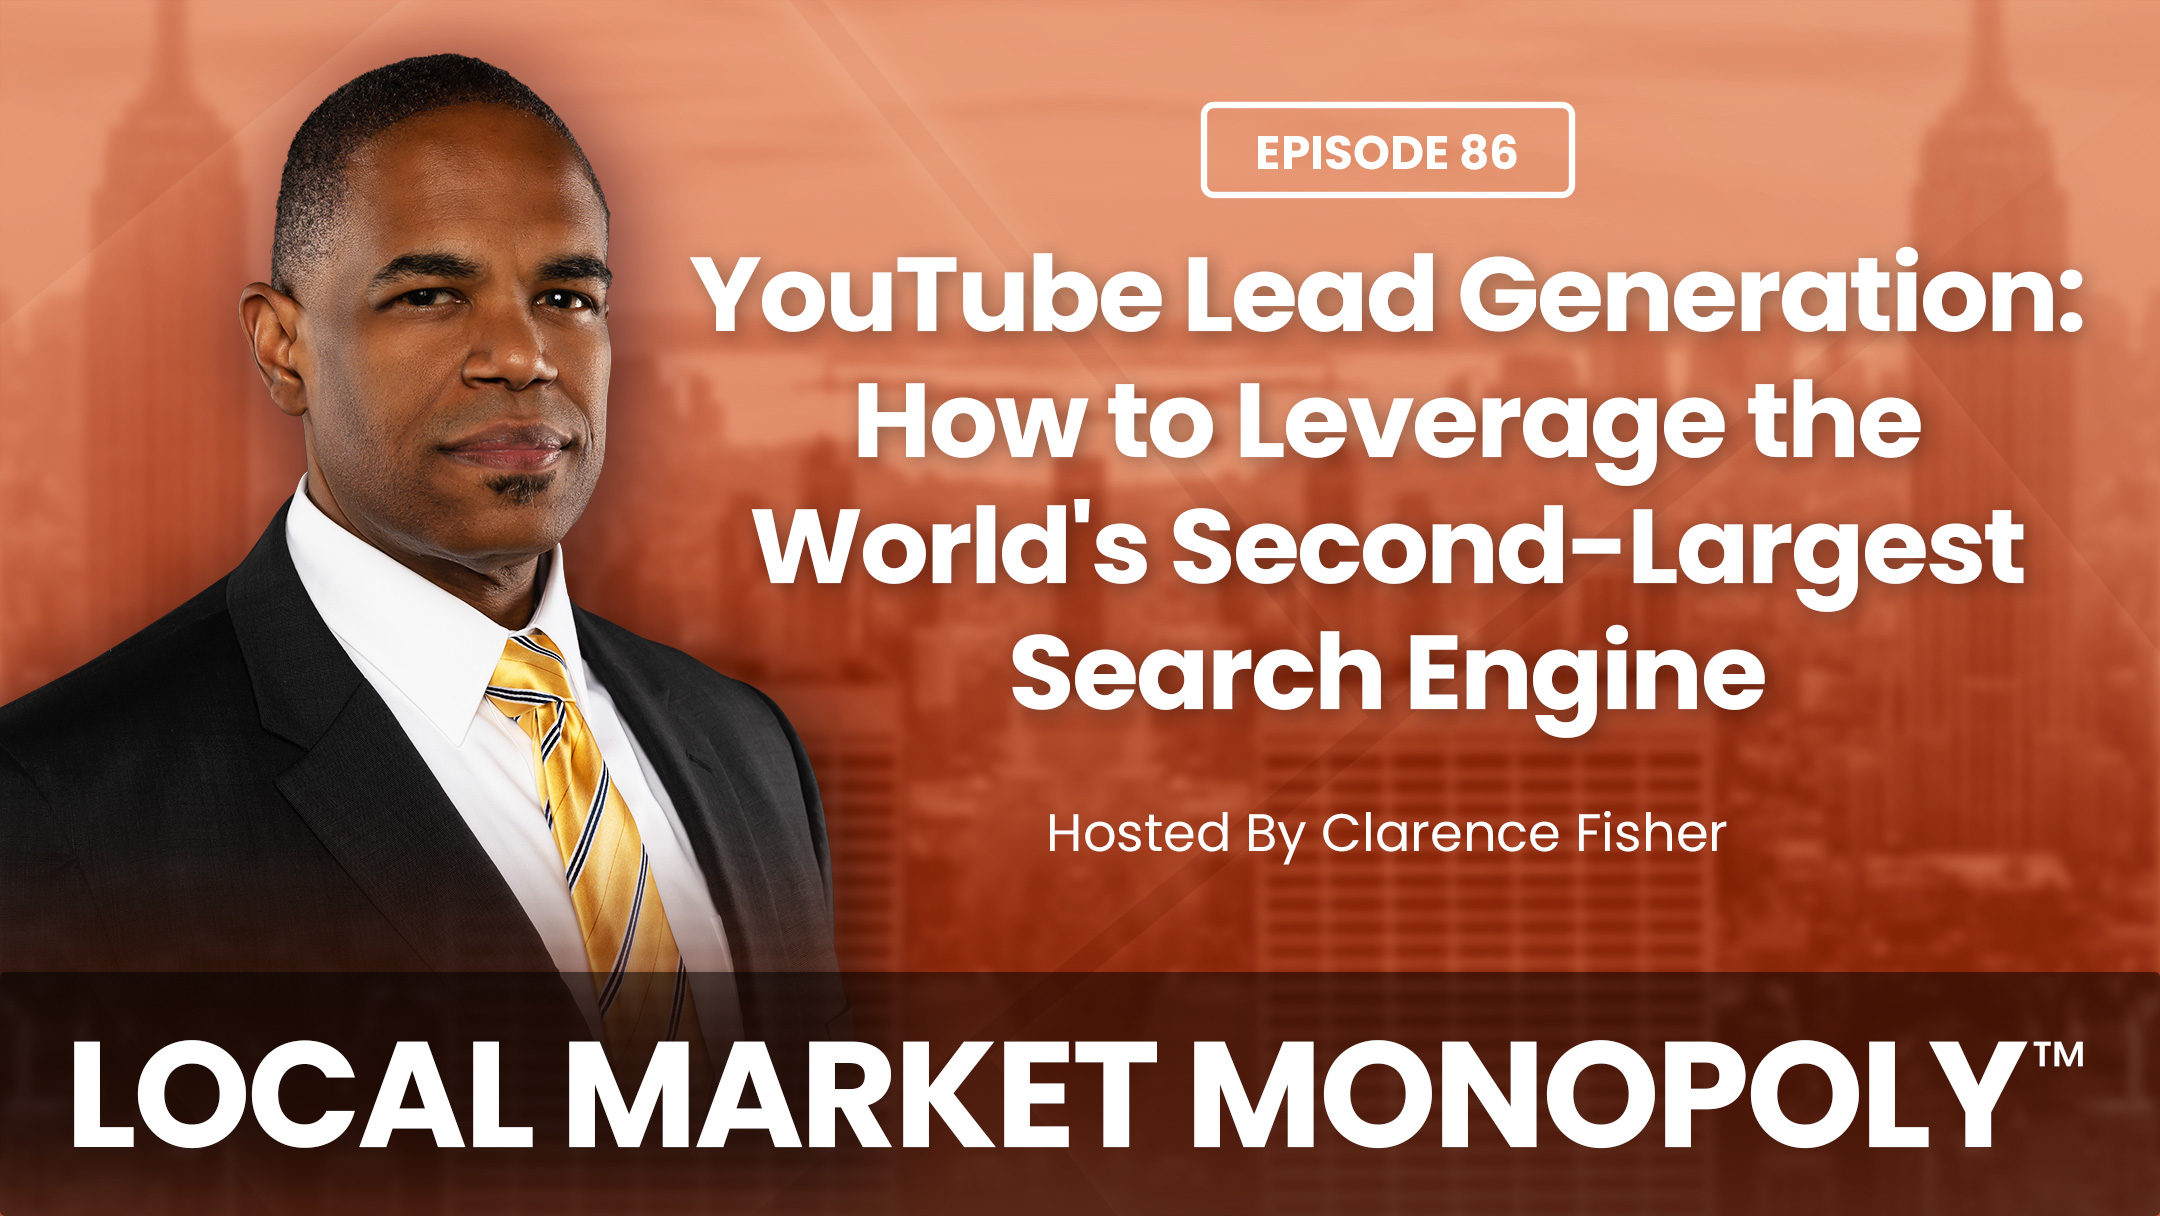 YouTube Lead Generation: How to Leverage the World’s Second Largest Search Engine